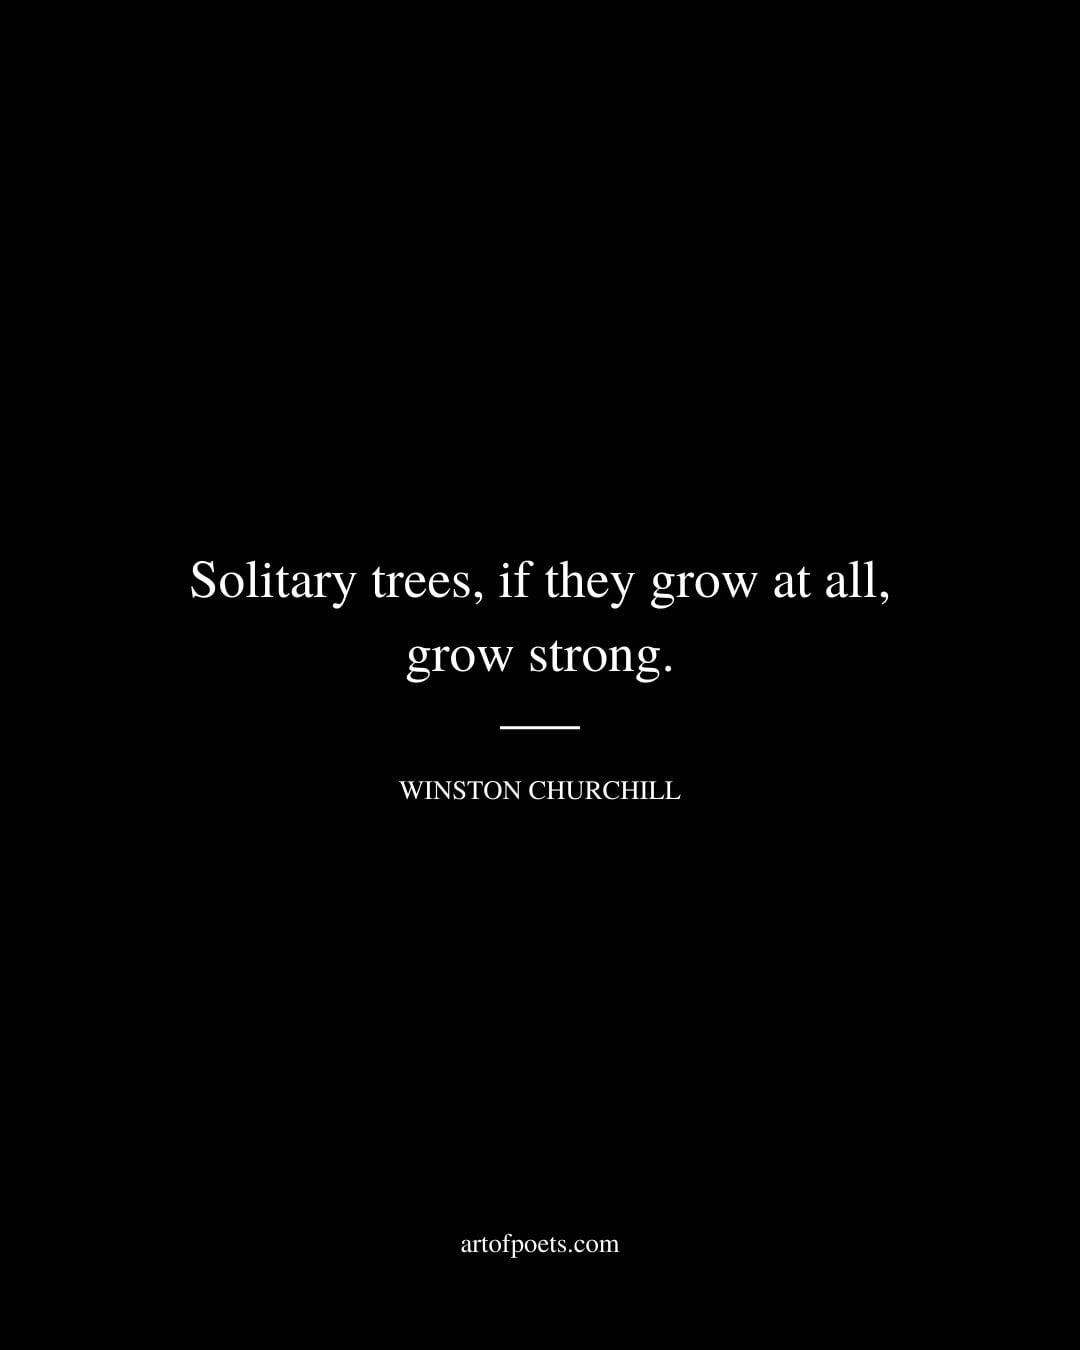 Solitary trees if they grow at all grow strong